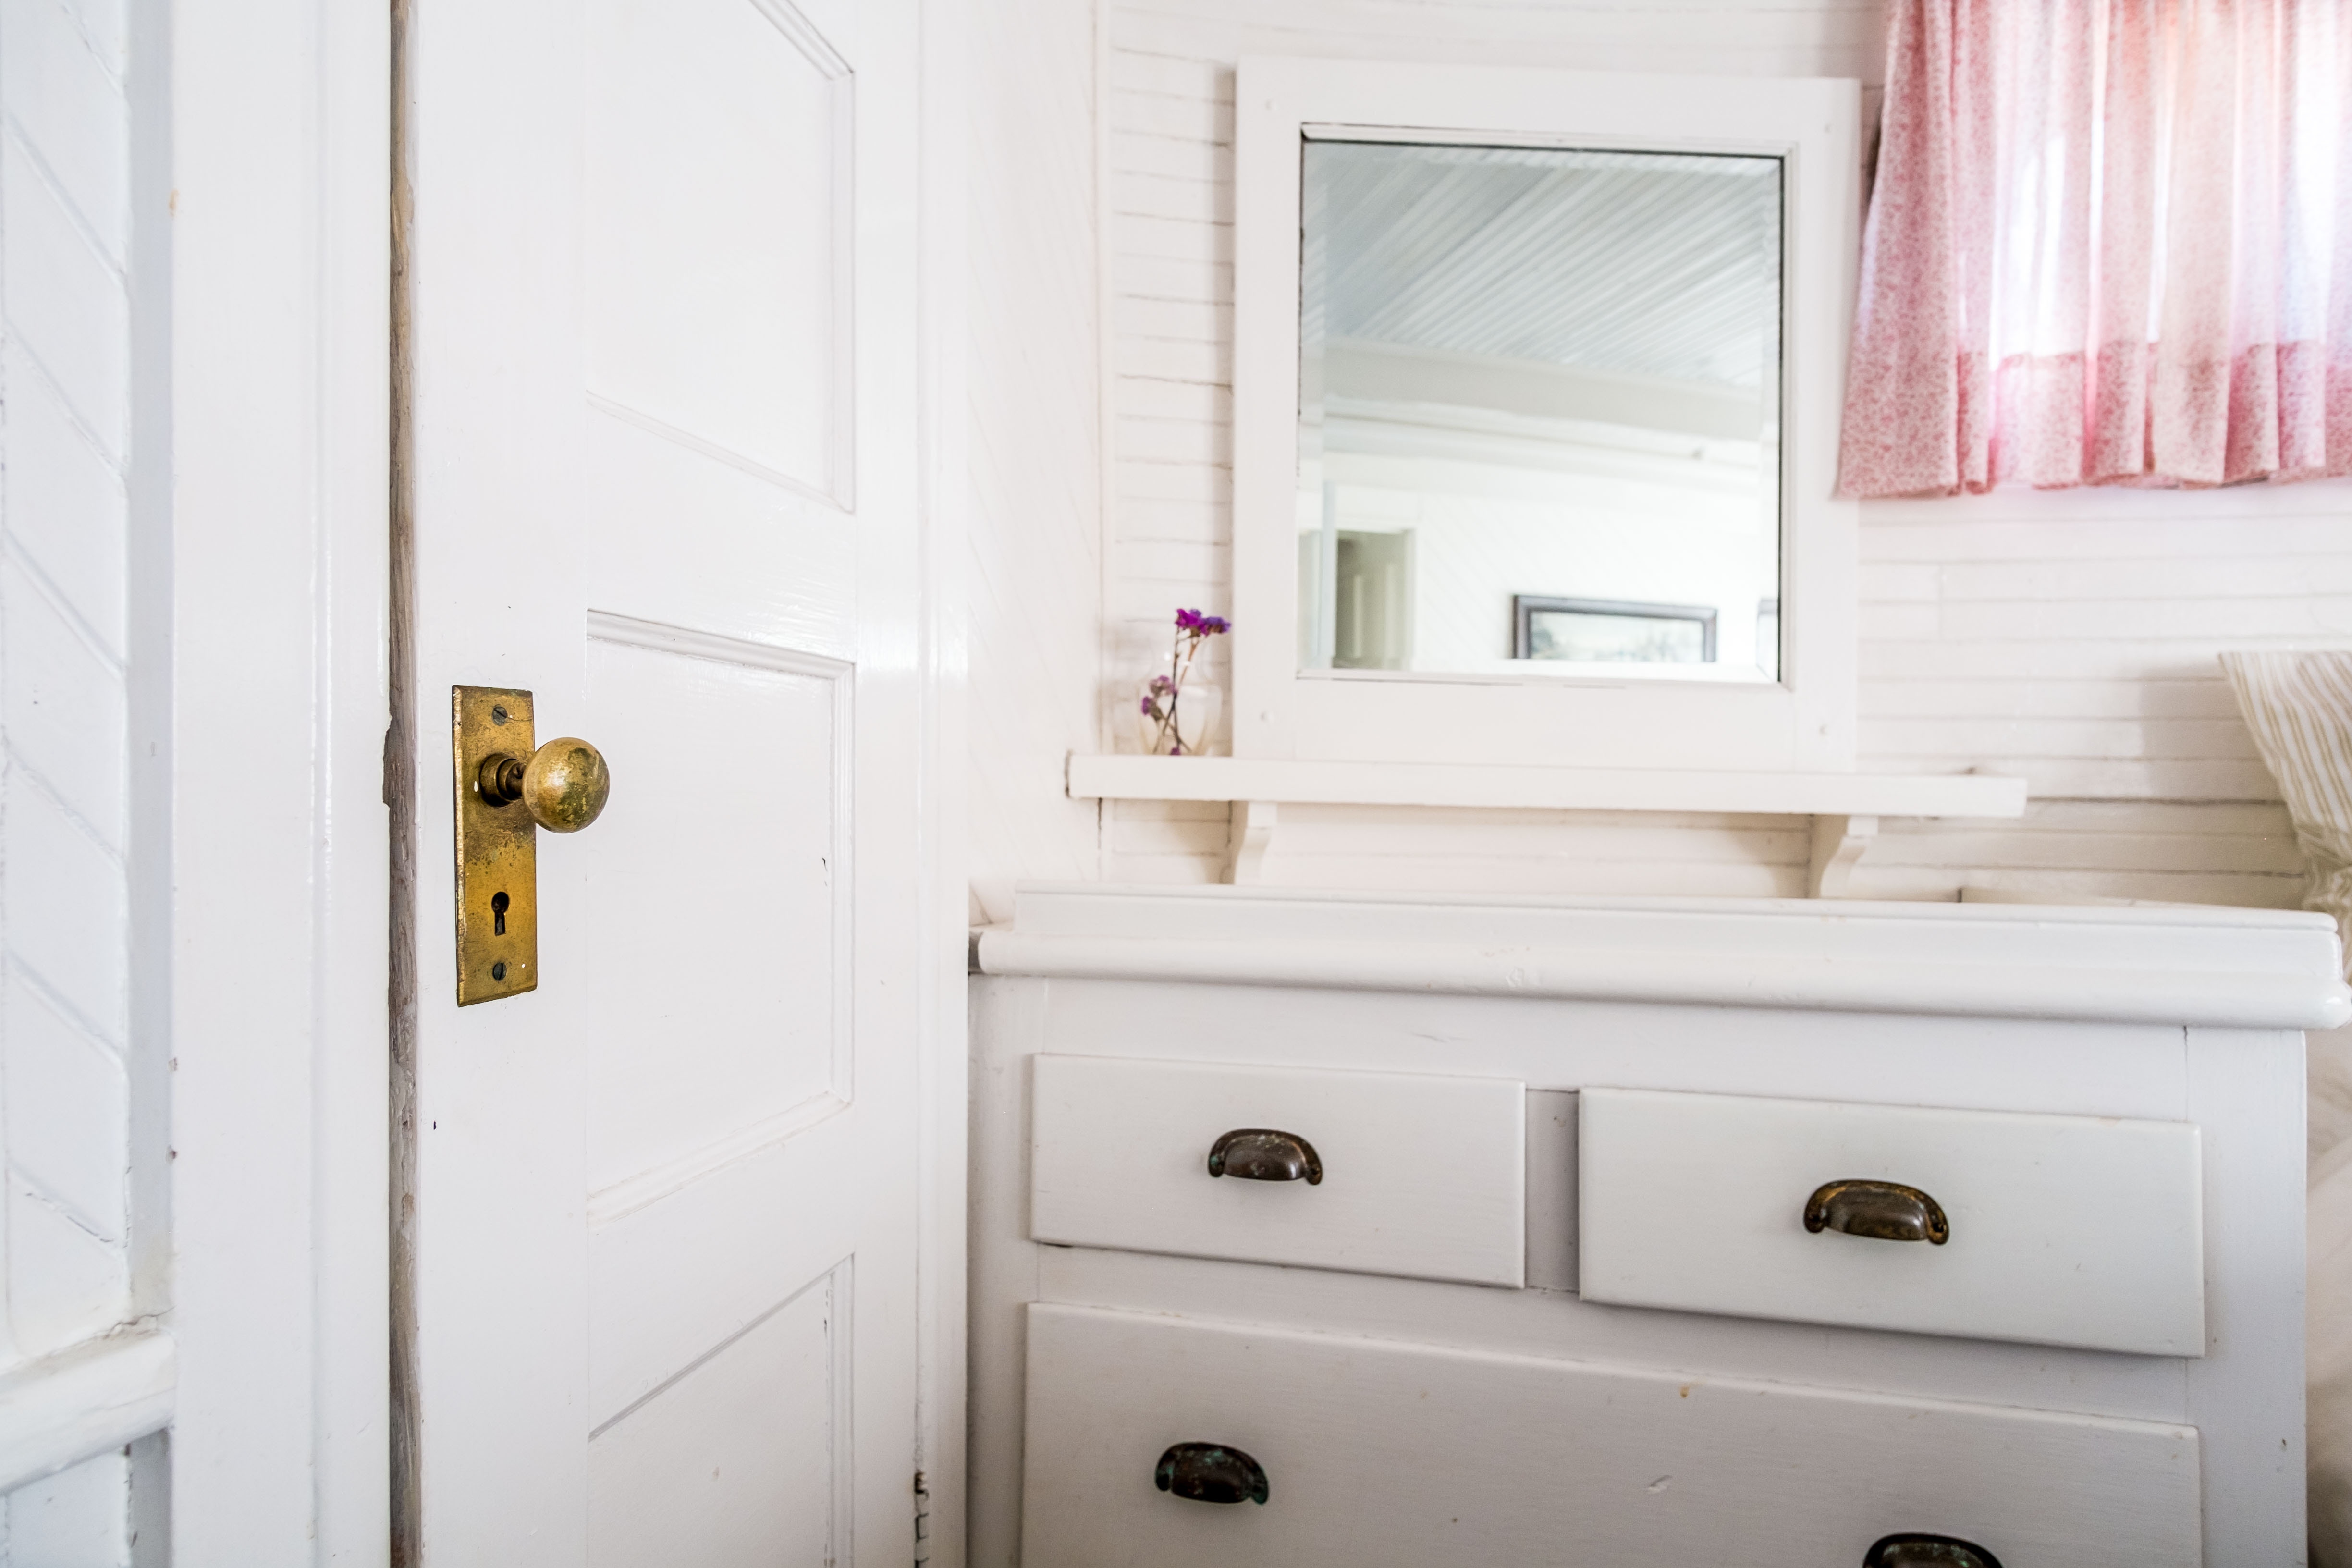 BATHROOM PHOTOGRAPHY TRICKS HOW TO AVOID REFLECTIONS